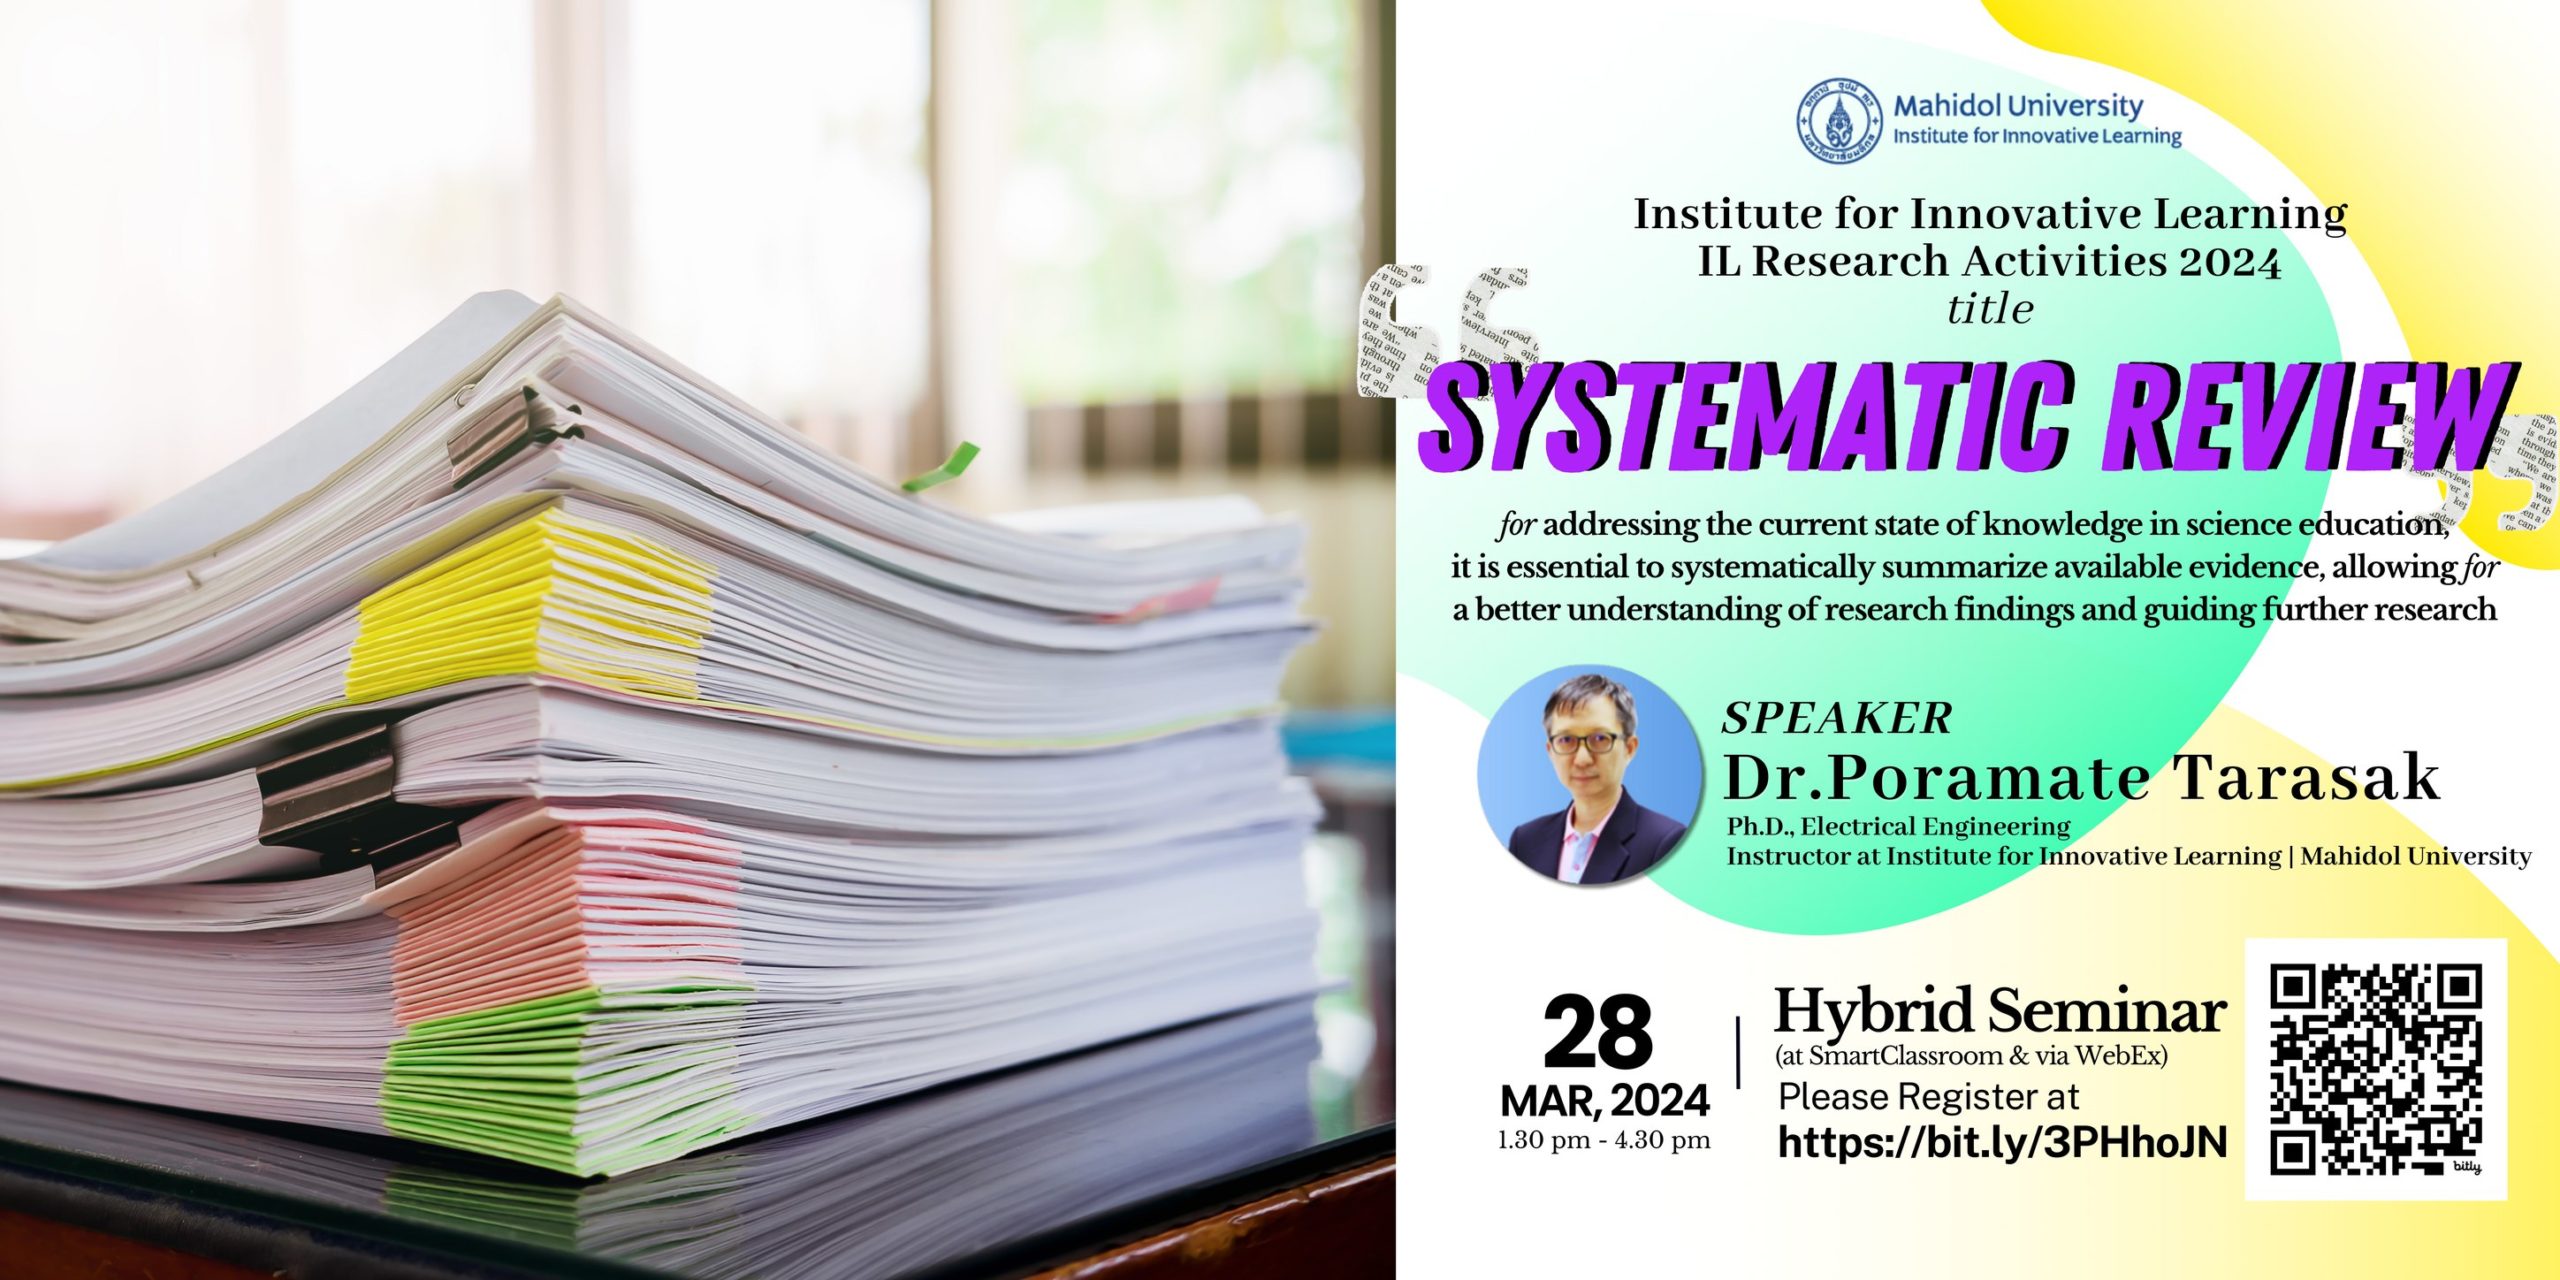 IL Research Activity “Systematic Review”